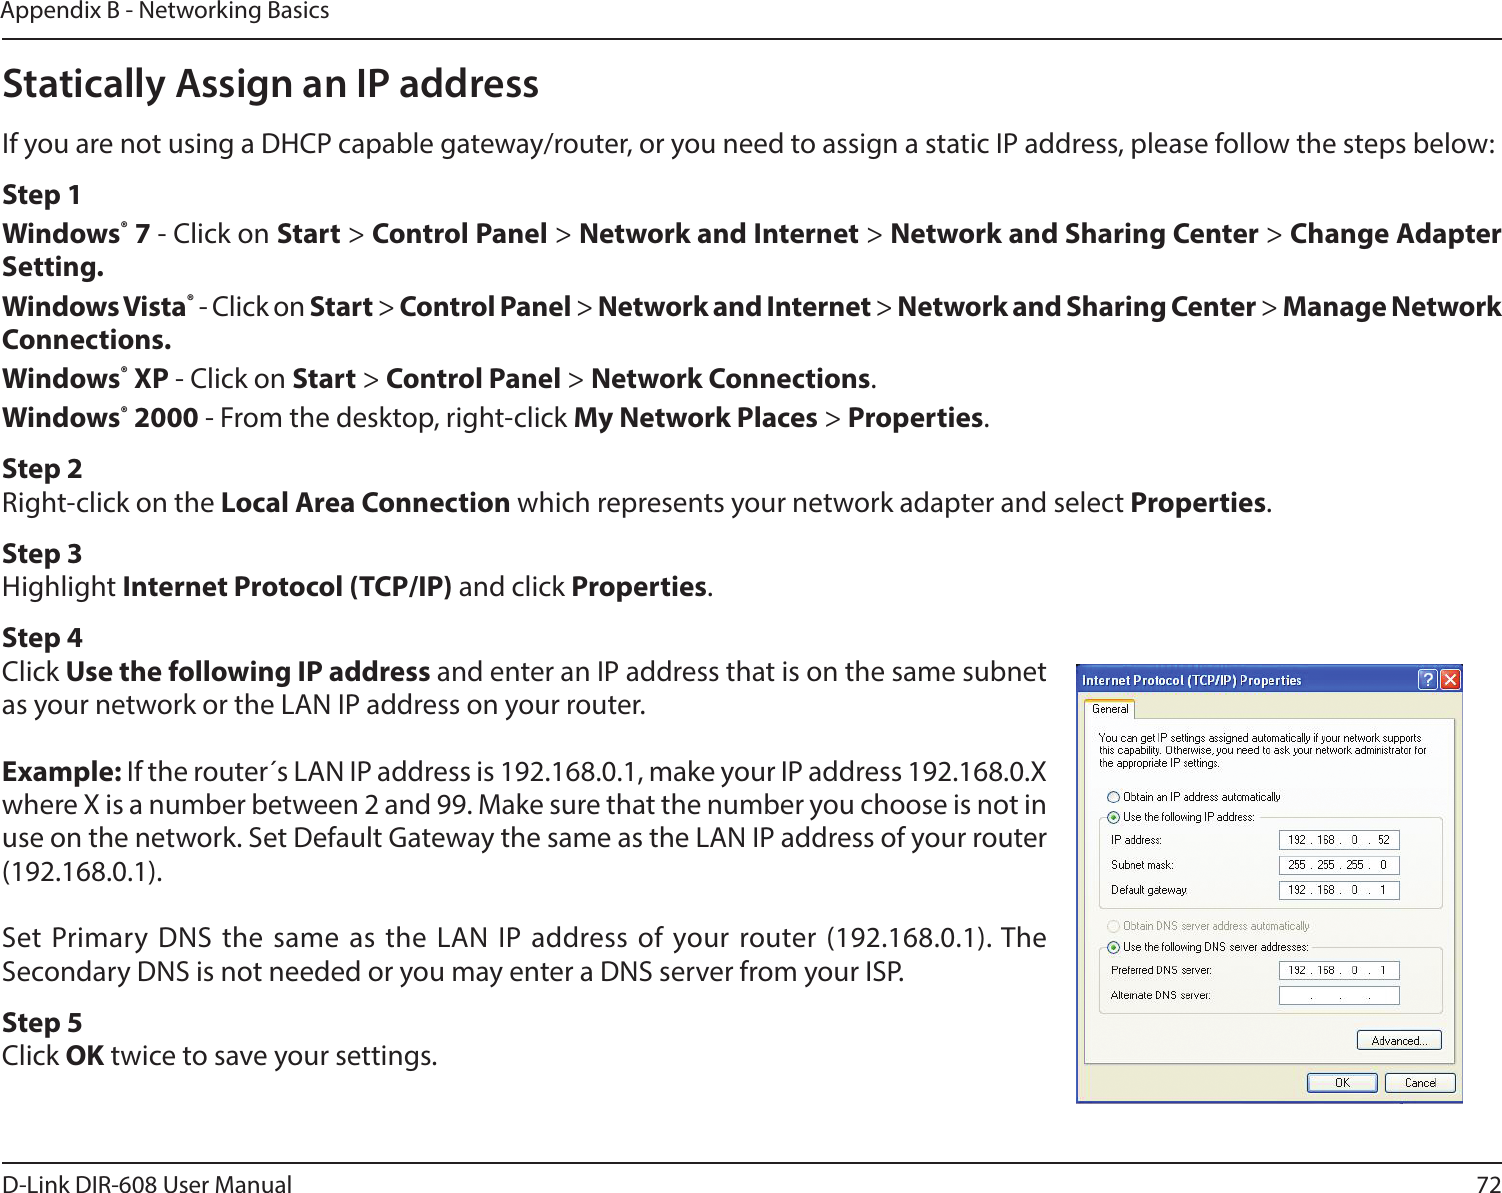 72D-Link DIR-608 User ManualAppendix B - Networking BasicsStatically Assign an IP addressIf you are not using a DHCP capable gateway/router, or you need to assign a static IP address, please follow the steps below:Step 1Windows® 7 - Click on Start &gt; Control Panel &gt; Network and Internet &gt; Network and Sharing Center &gt; Change Adapter Setting. Windows Vista® - Click on Start &gt; Control Panel &gt; Network and Internet &gt; Network and Sharing Center &gt; Manage Network Connections.Windows® XP - Click on Start &gt; Control Panel &gt; Network Connections.Windows® 2000 - From the desktop, right-click My Network Places &gt; Properties.Step 2Right-click on the Local Area Connection which represents your network adapter and select Properties.Step 3Highlight Internet Protocol (TCP/IP) and click Properties.Step 4Click Use the following IP address and enter an IP address that is on the same subnet as your network or the LAN IP address on your router.Example: If the router´s LAN IP address is 192.168.0.1, make your IP address 192.168.0.X where X is a number between 2 and 99. Make sure that the number you choose is not in use on the network. Set Default Gateway the same as the LAN IP address of your router (192.168.0.1). Set Primary DNS the same as the LAN IP address of your router (192.168.0.1). The Secondary DNS is not needed or you may enter a DNS server from your ISP.Step 5Click OK twice to save your settings.